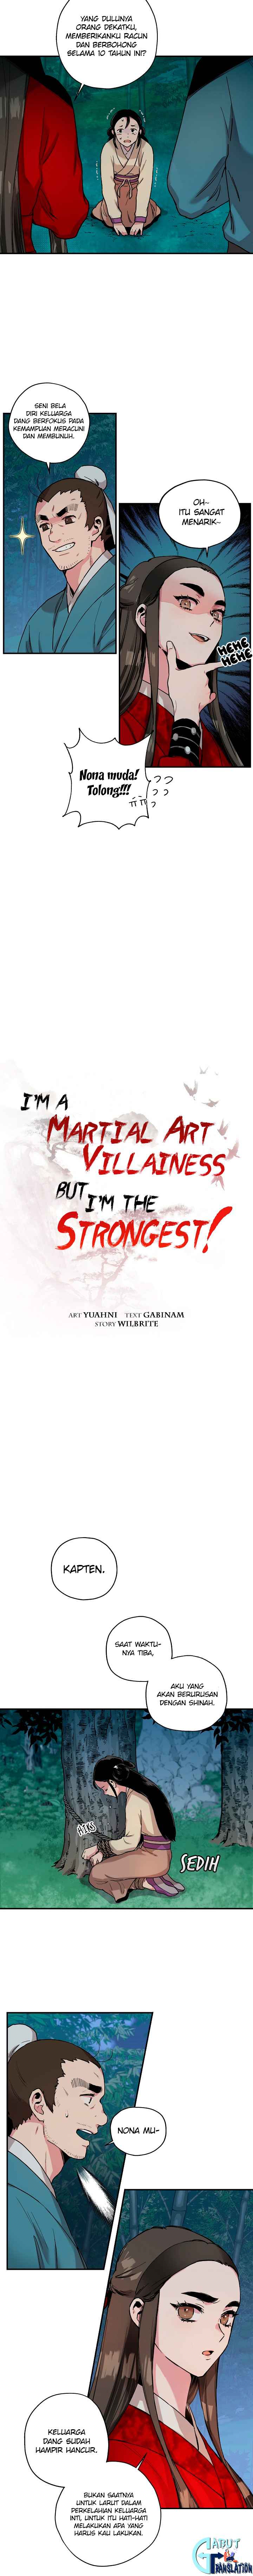 I’m A Martial Art Villainess But I’m The Strongest! Chapter 6